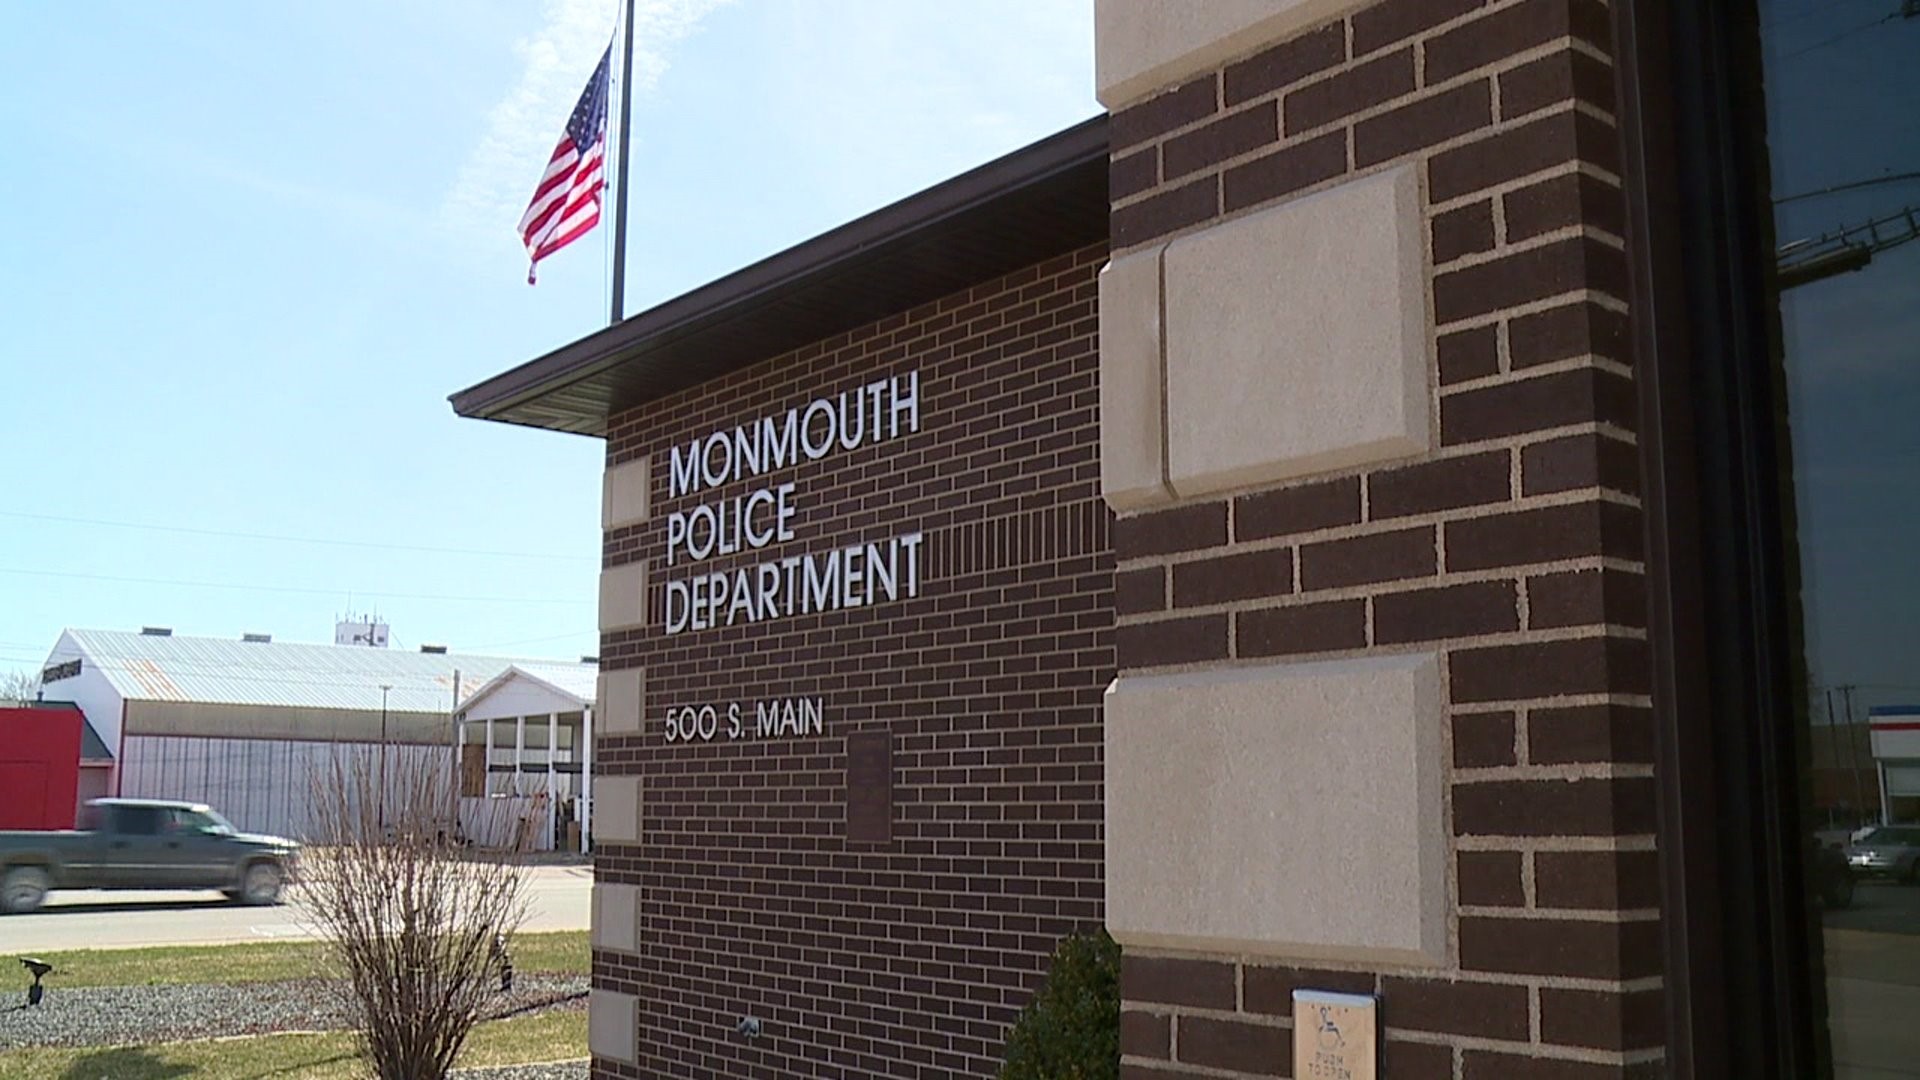 Monmouth police ask immigrants to report crime regardless of immigration status